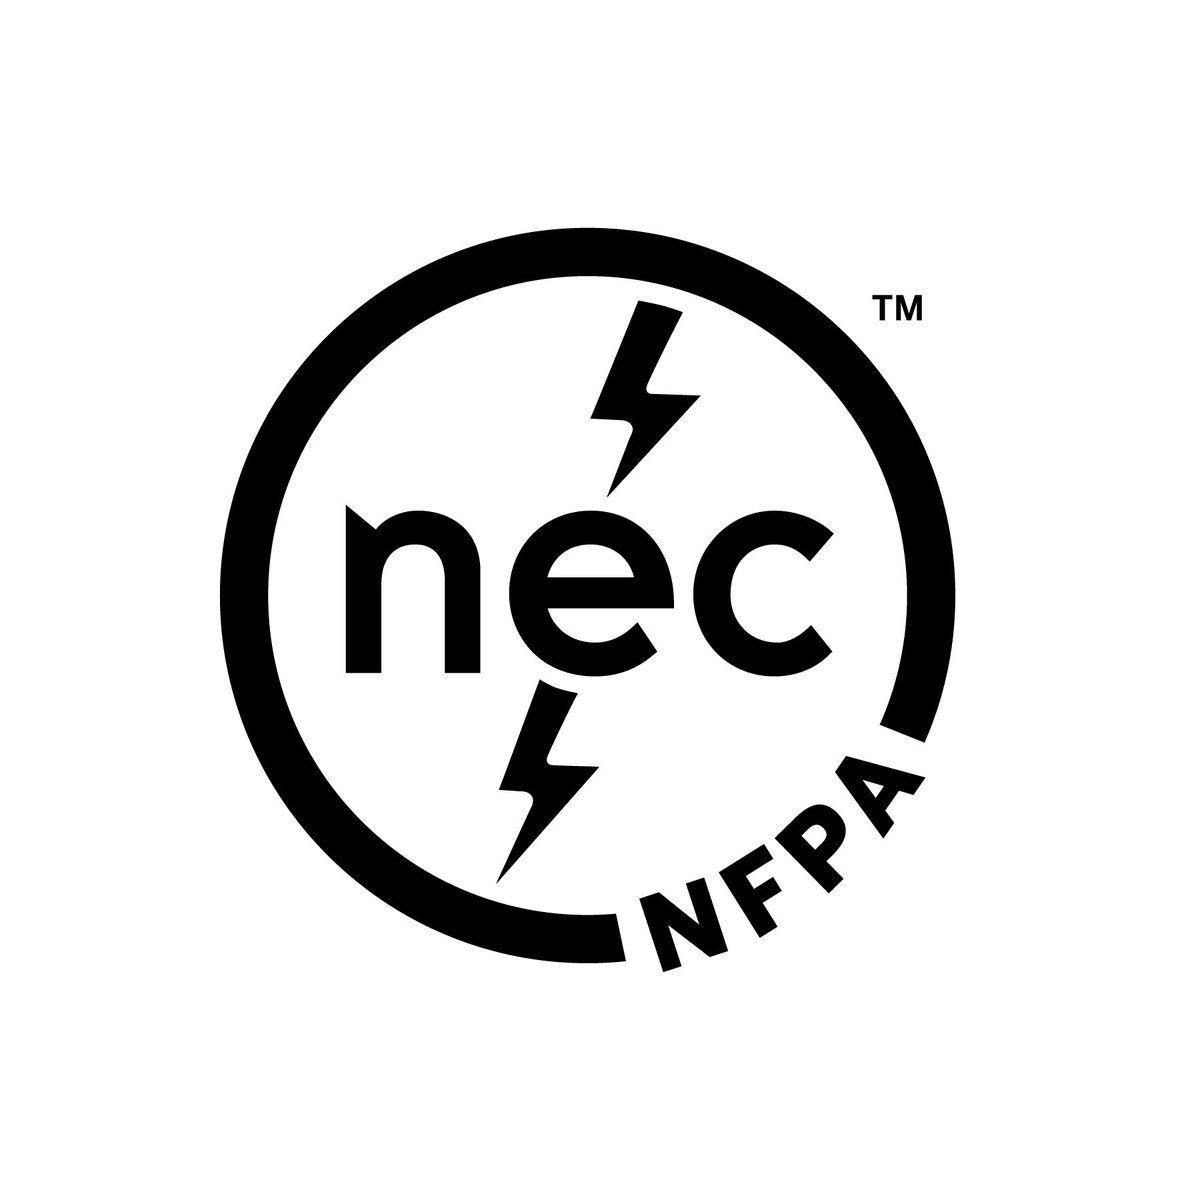 NFPA Logo - NFPA the First Draft Report to submit comments